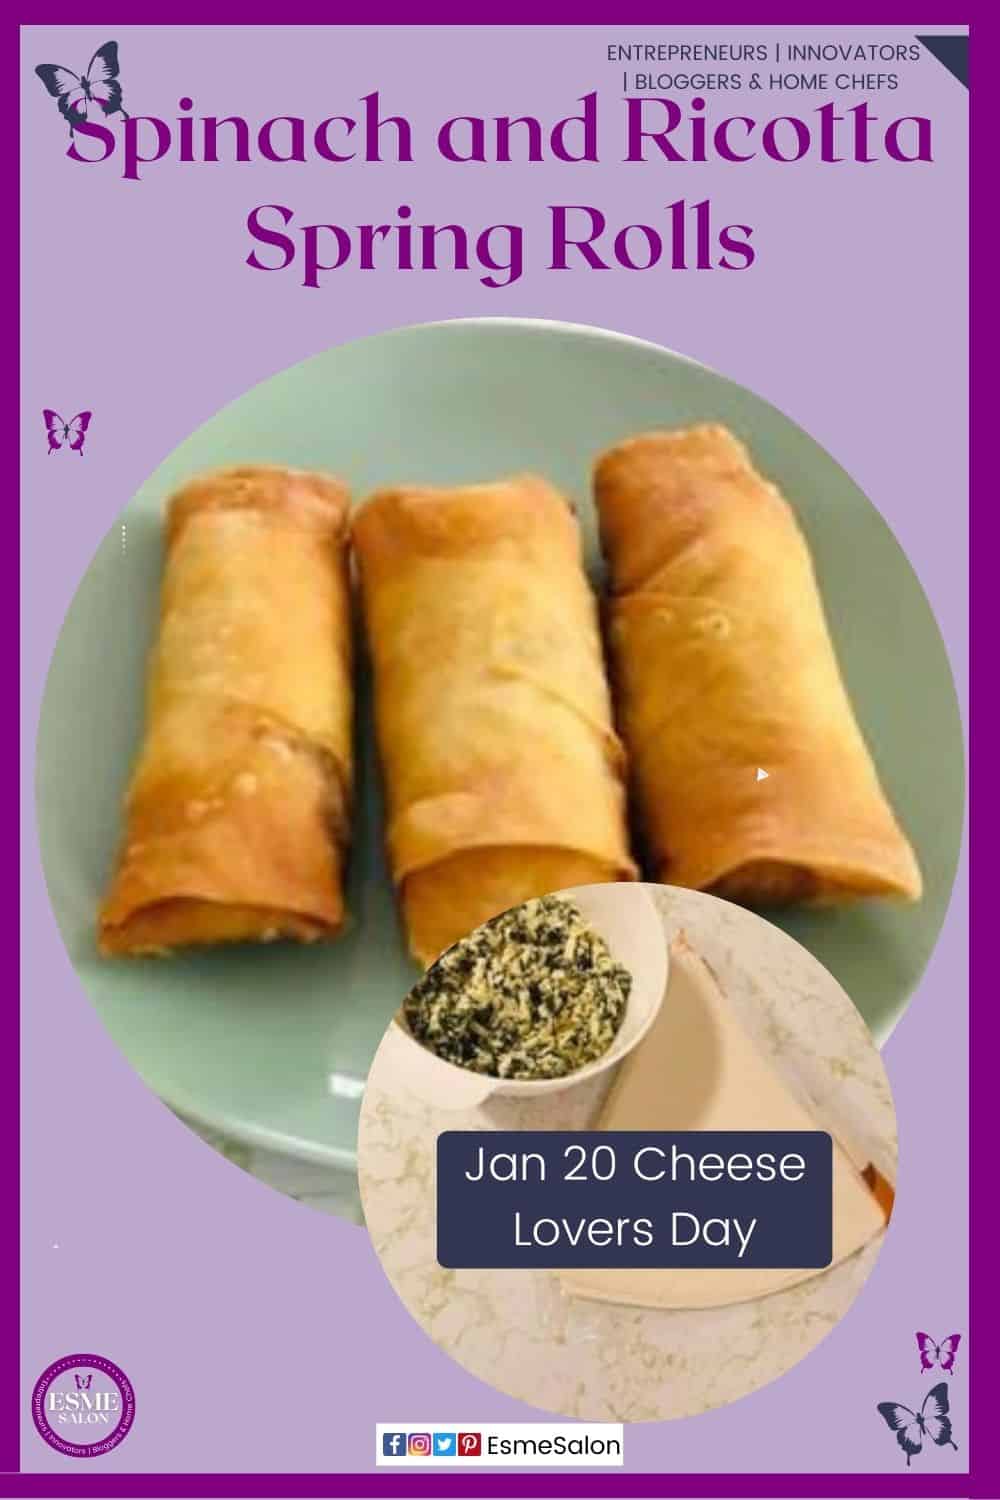 an image of 3 springrolls with a bowl of filling made of spinach and ricotta cheese